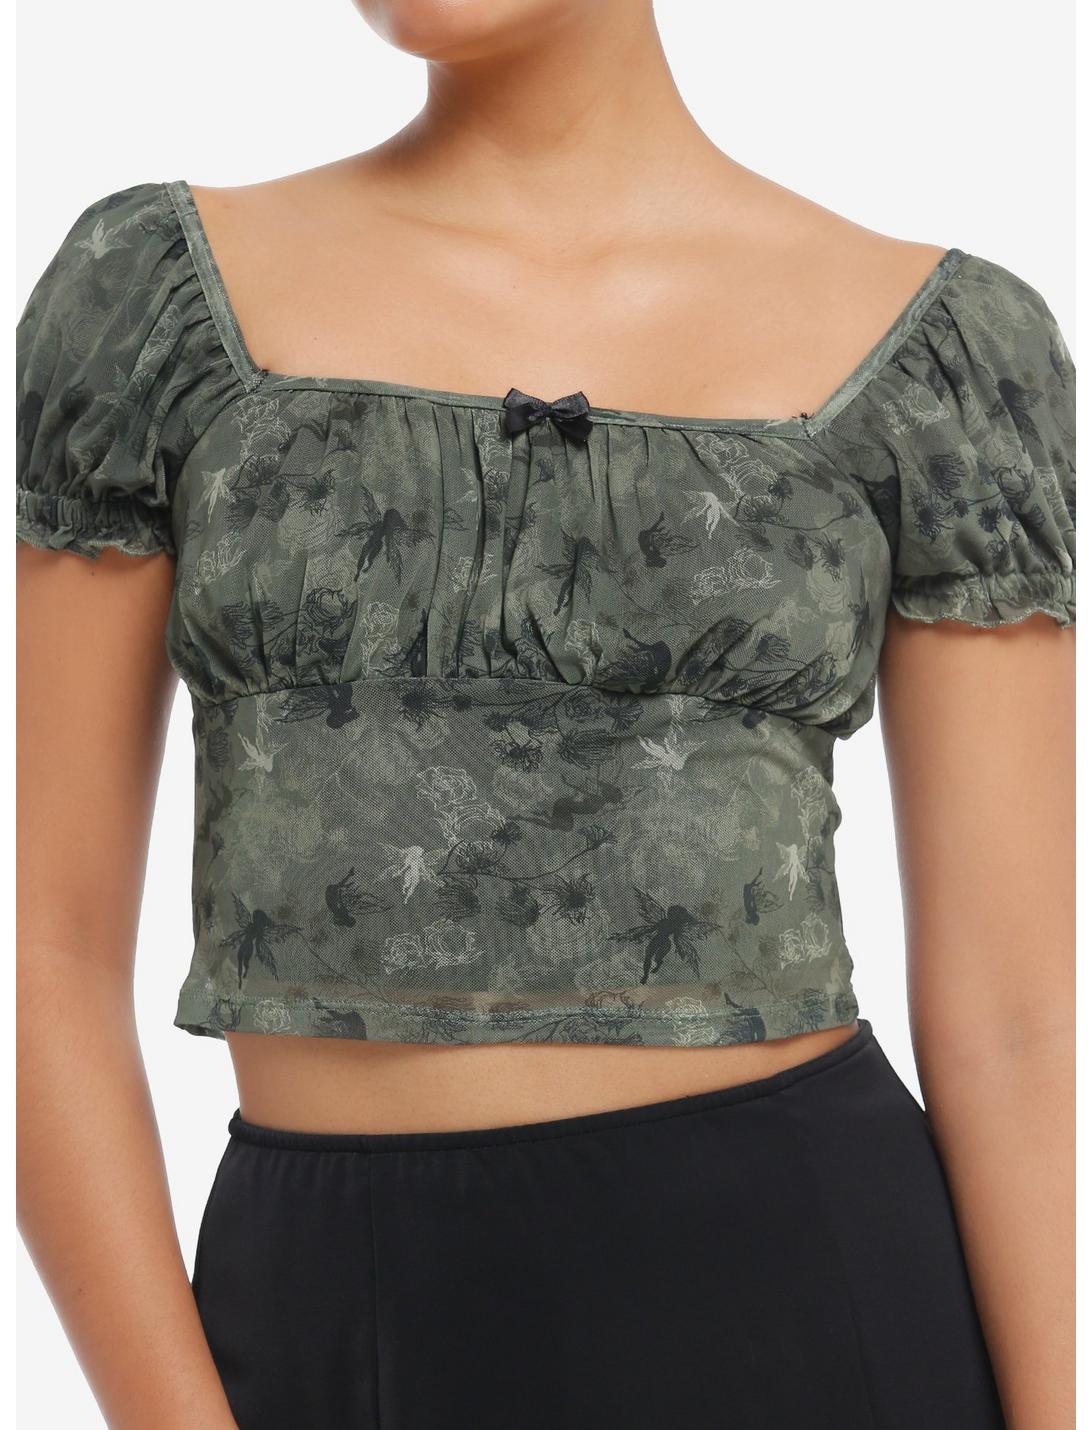 Thorn & Fable Olive Green Fairy Mesh Girls Crop Top, BLACK, hi-res